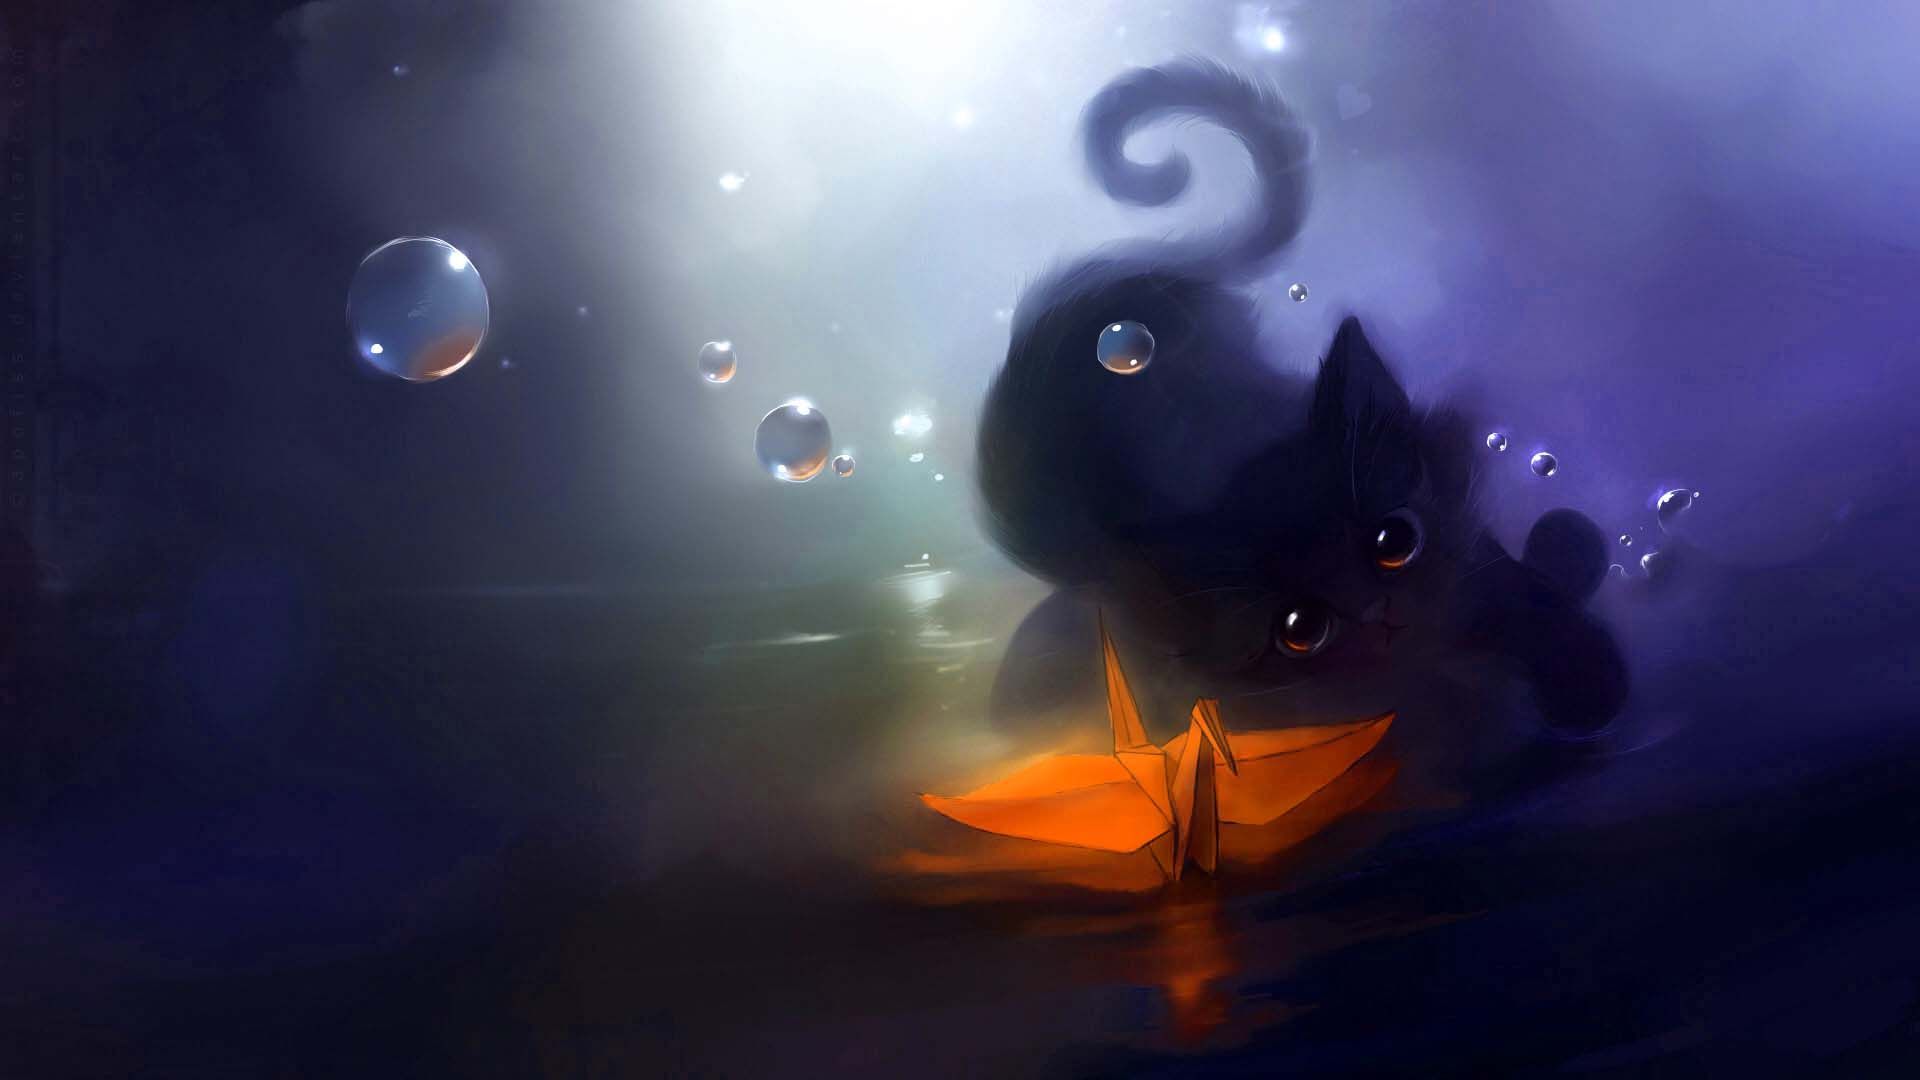 Cute Anime Cat Wallpapers